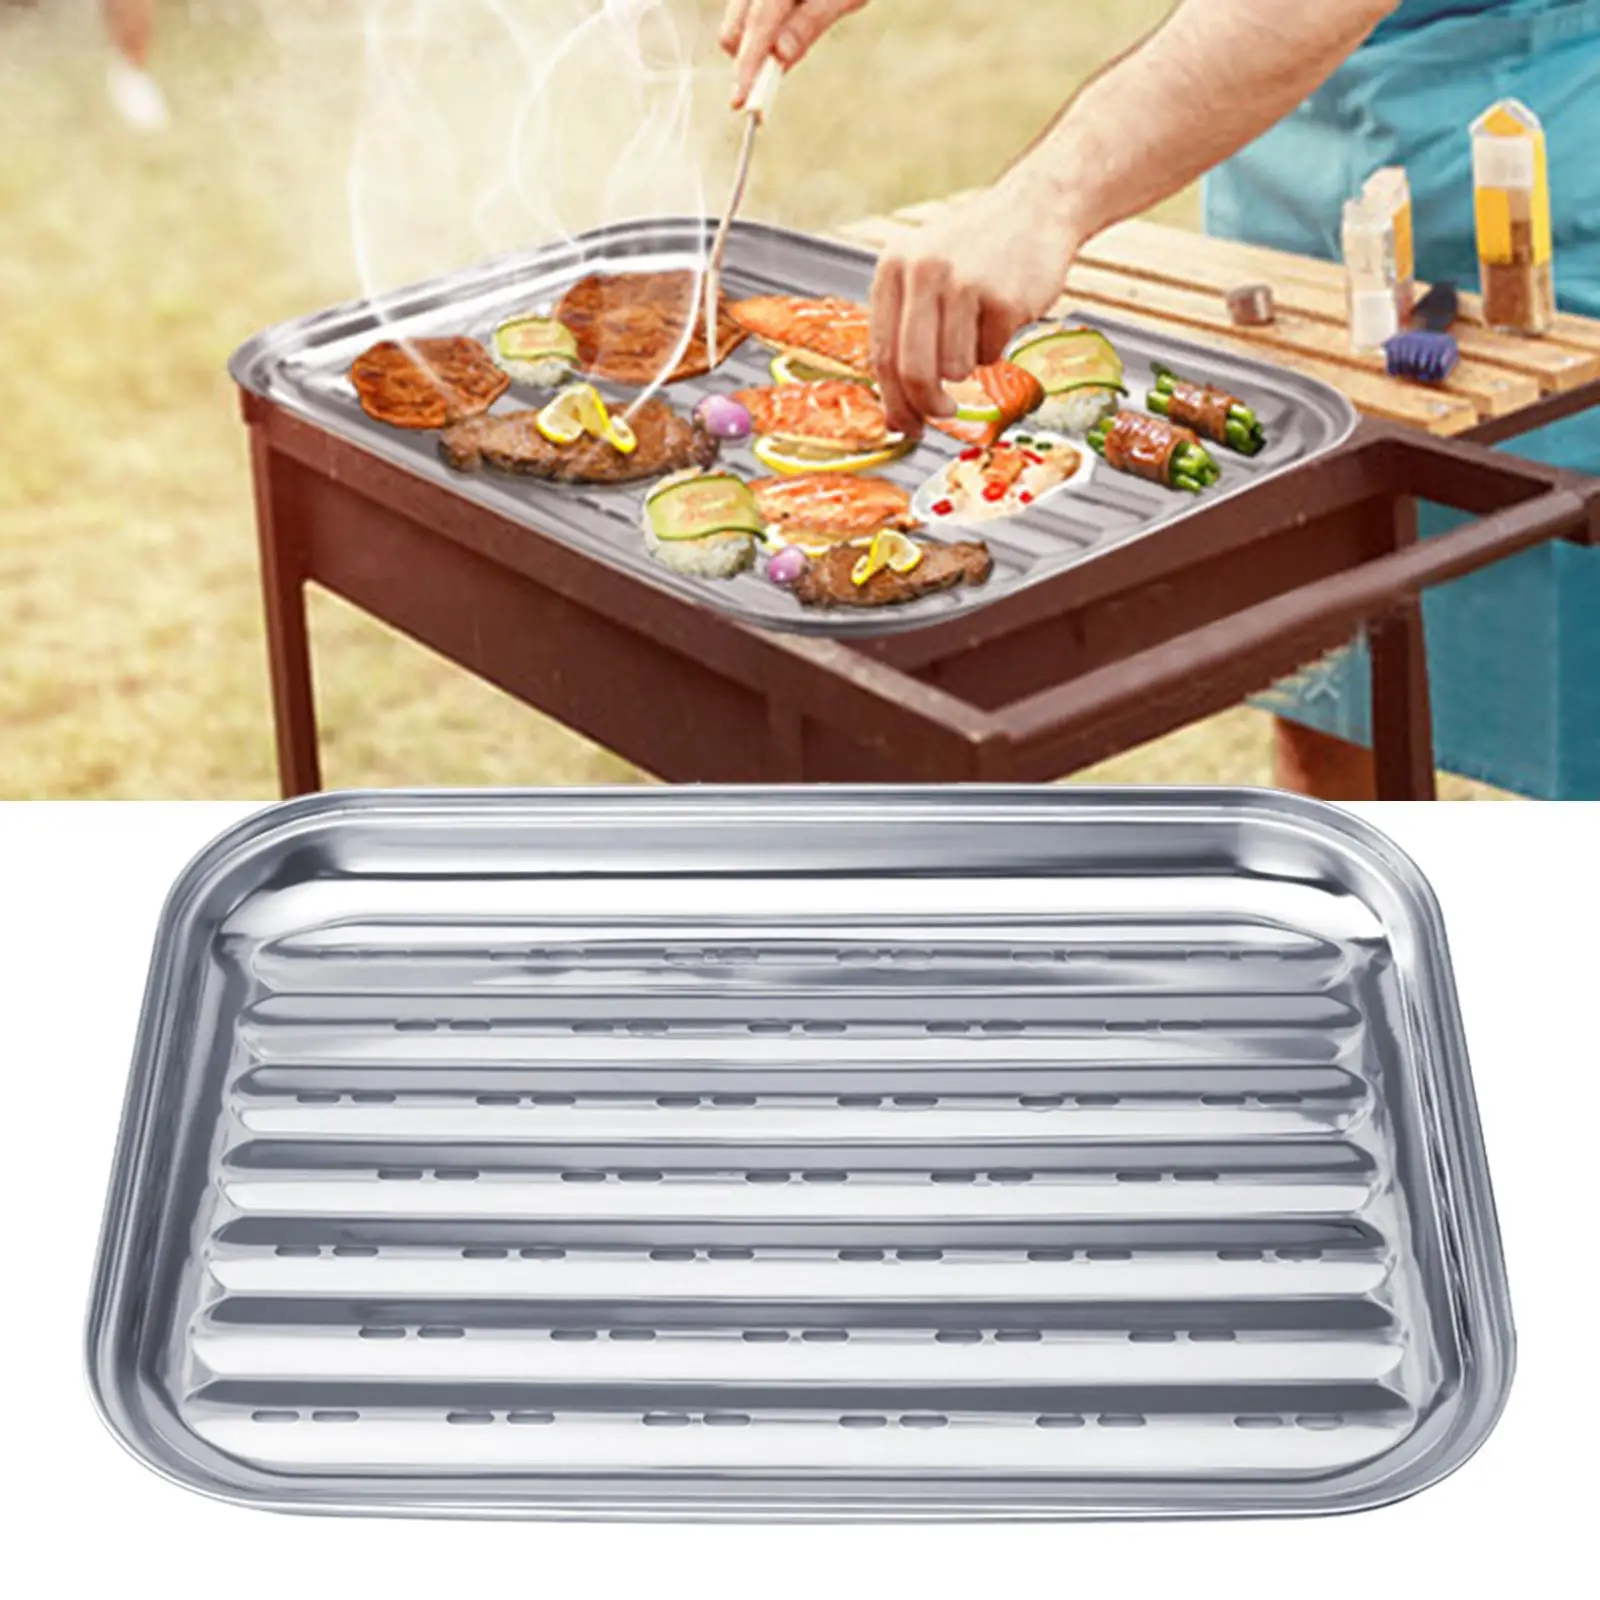 Stainless Steel Baking Oven Tray One Piece Professional Baking Pan Tray for Outdoor Cooking BBQ